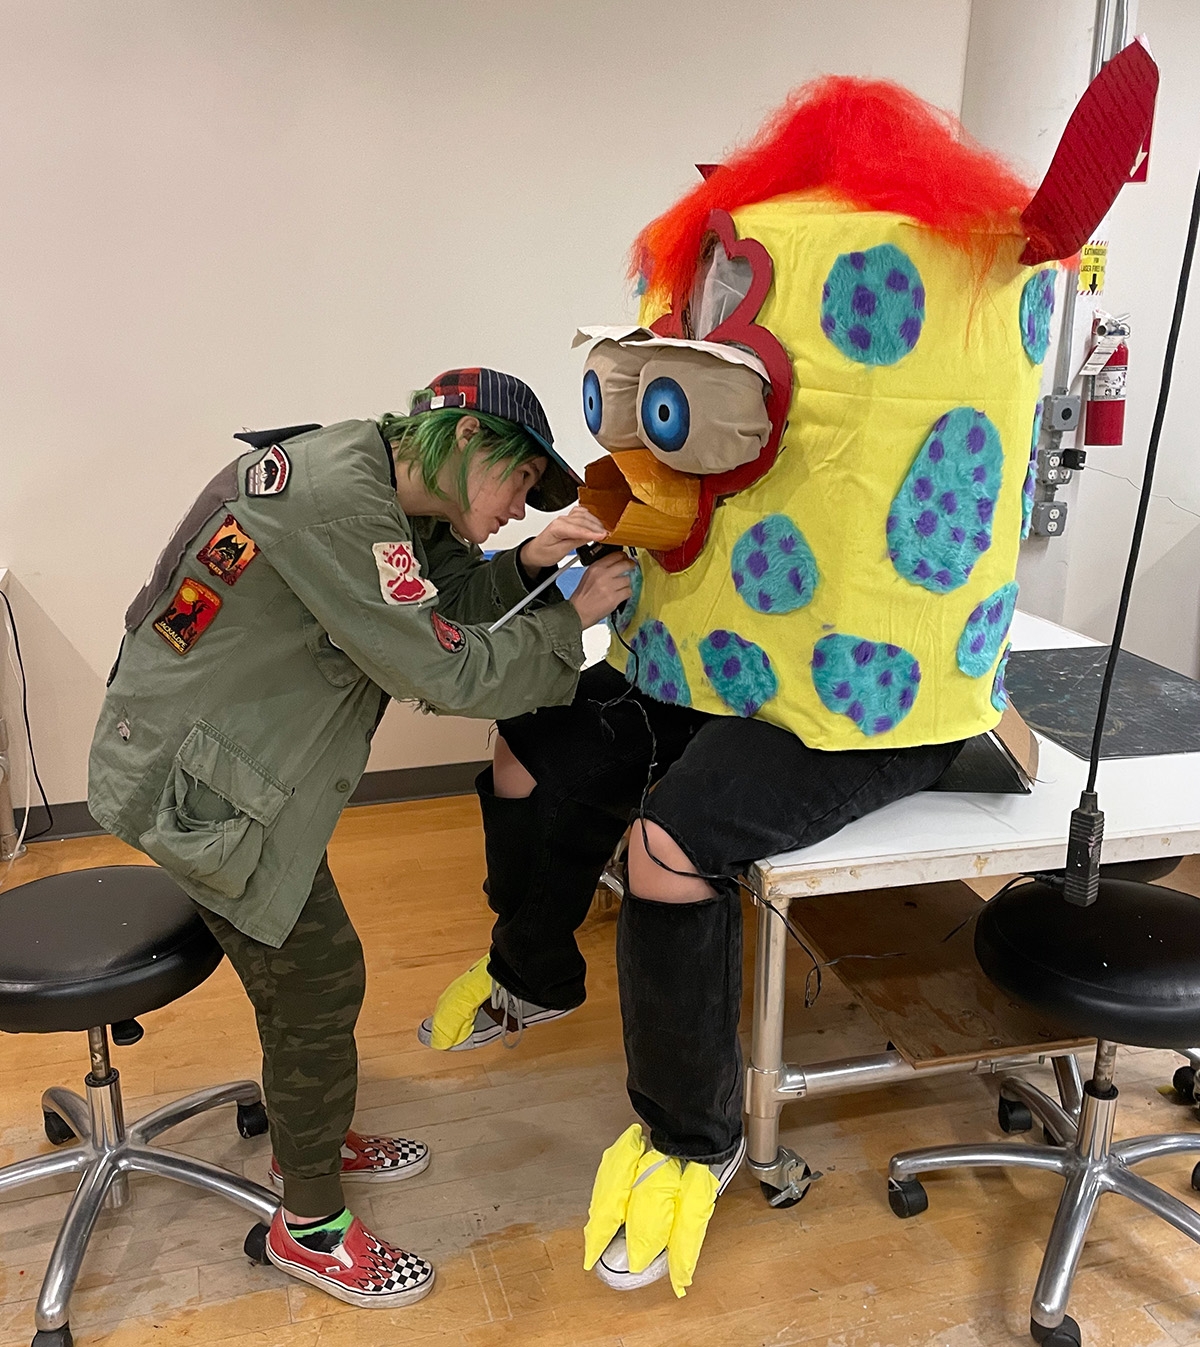 One student helps another put on furby-esque puppet costume